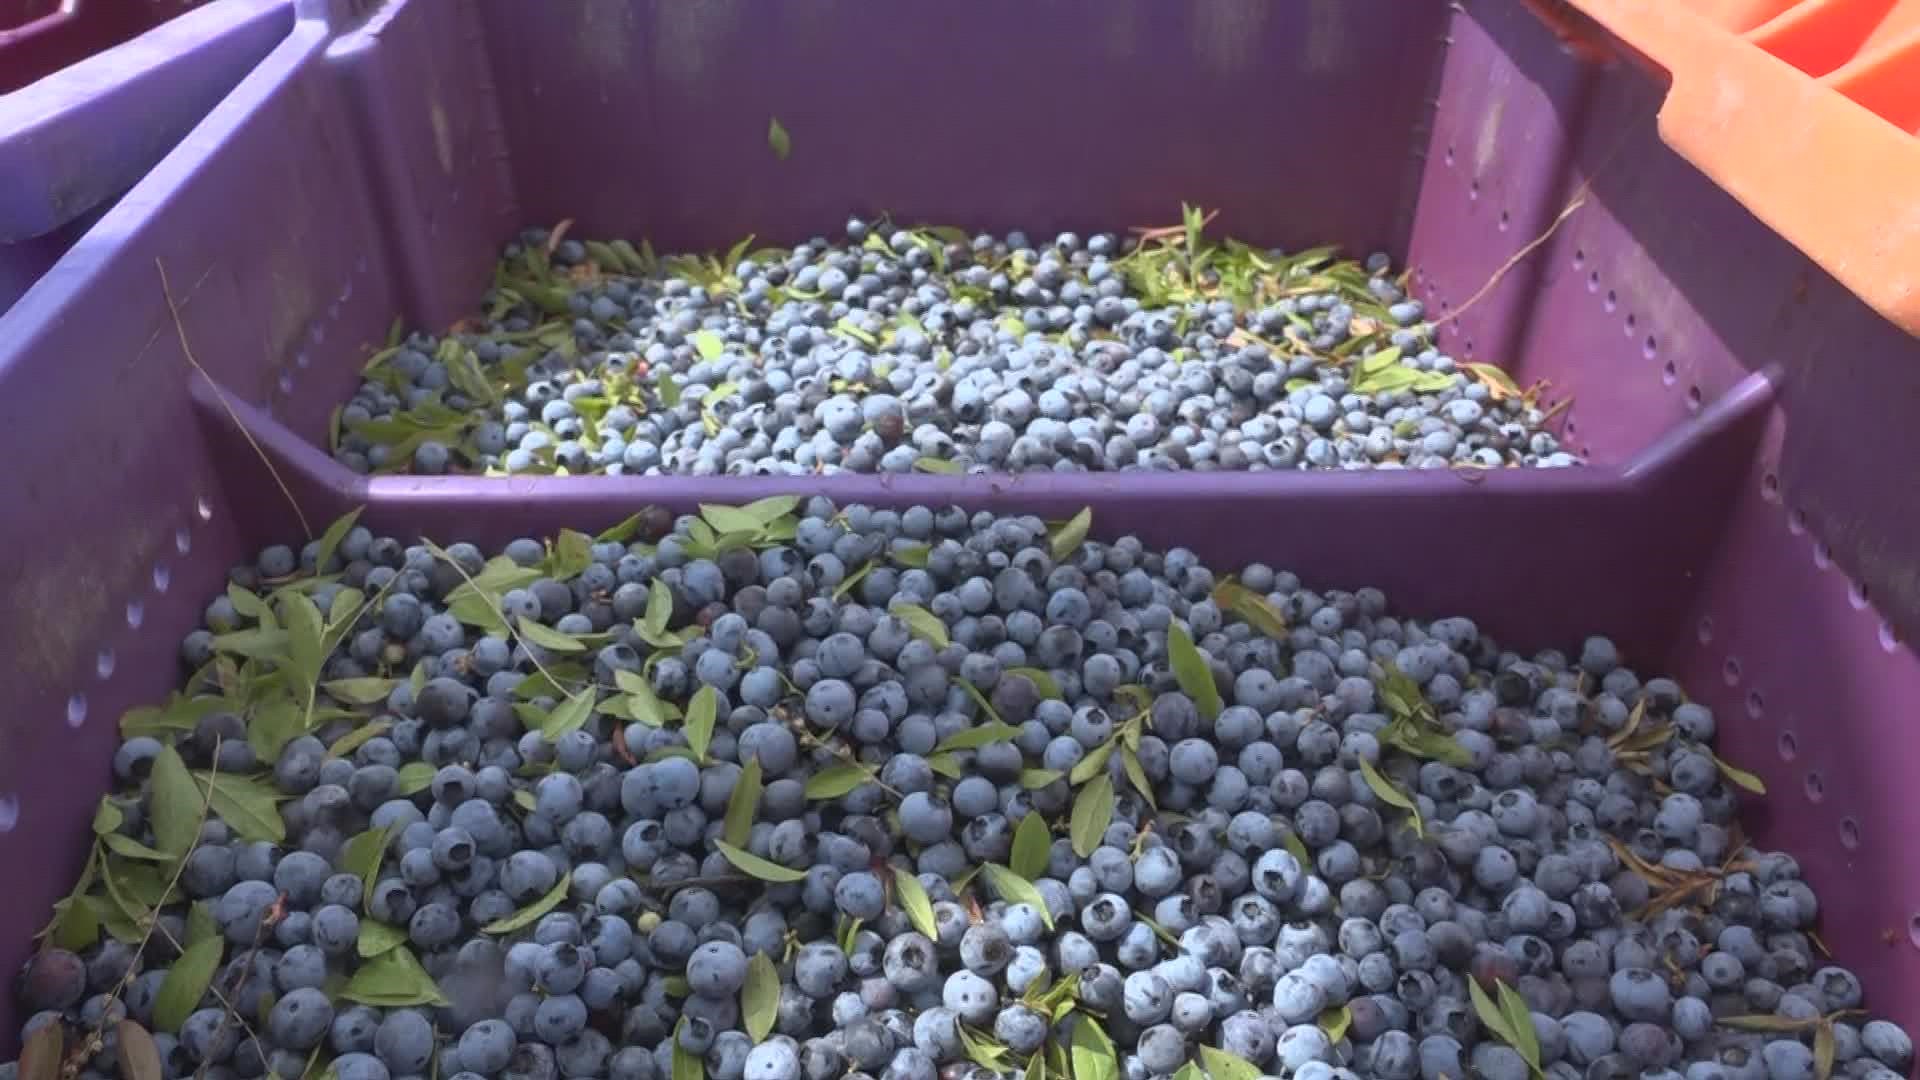 14 farms around the state participated in the second annual event promoting wild blueberry farms. Farmers said new farmers are needed to keep the industry alive.